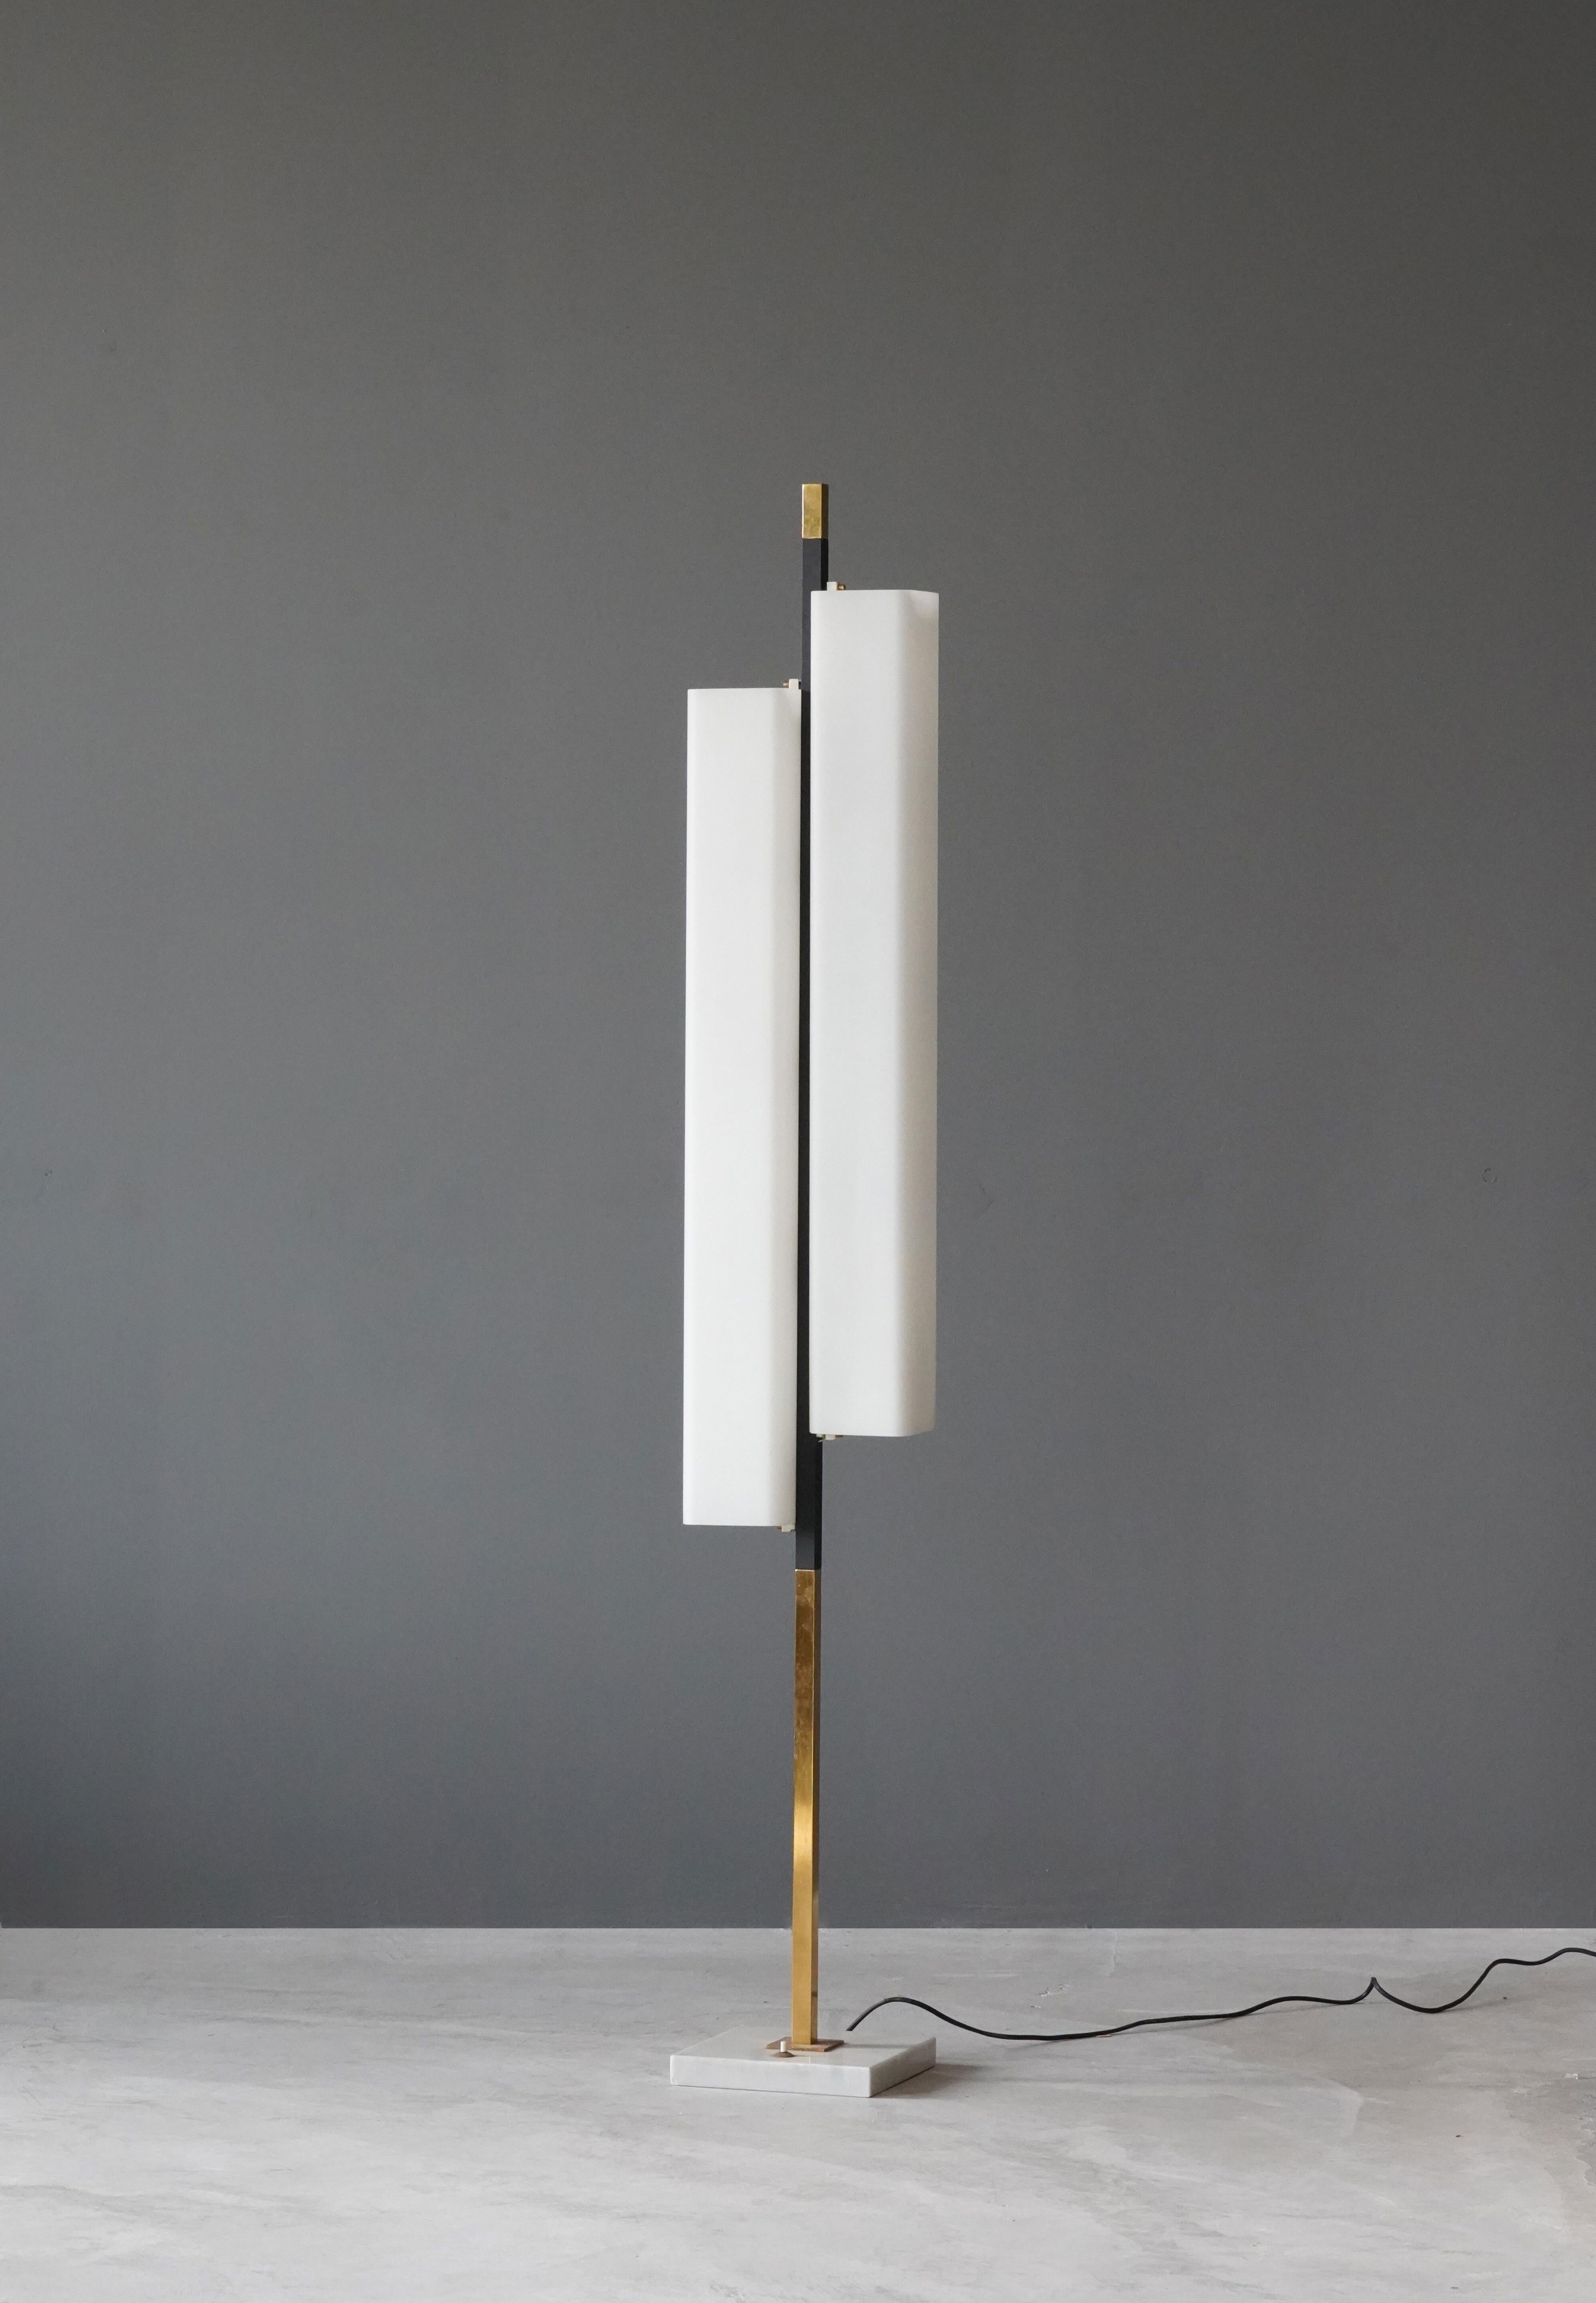 A rare modernist / Minimalist floor lamp produced by Stilnovo, Italy, 1950s. Features an interesting mix of marble, black lacquered metal, brass, and acrylic.

Other designers of the period include Max Ingrand, Angelo Lelii, Gino Sarfatti, Franco